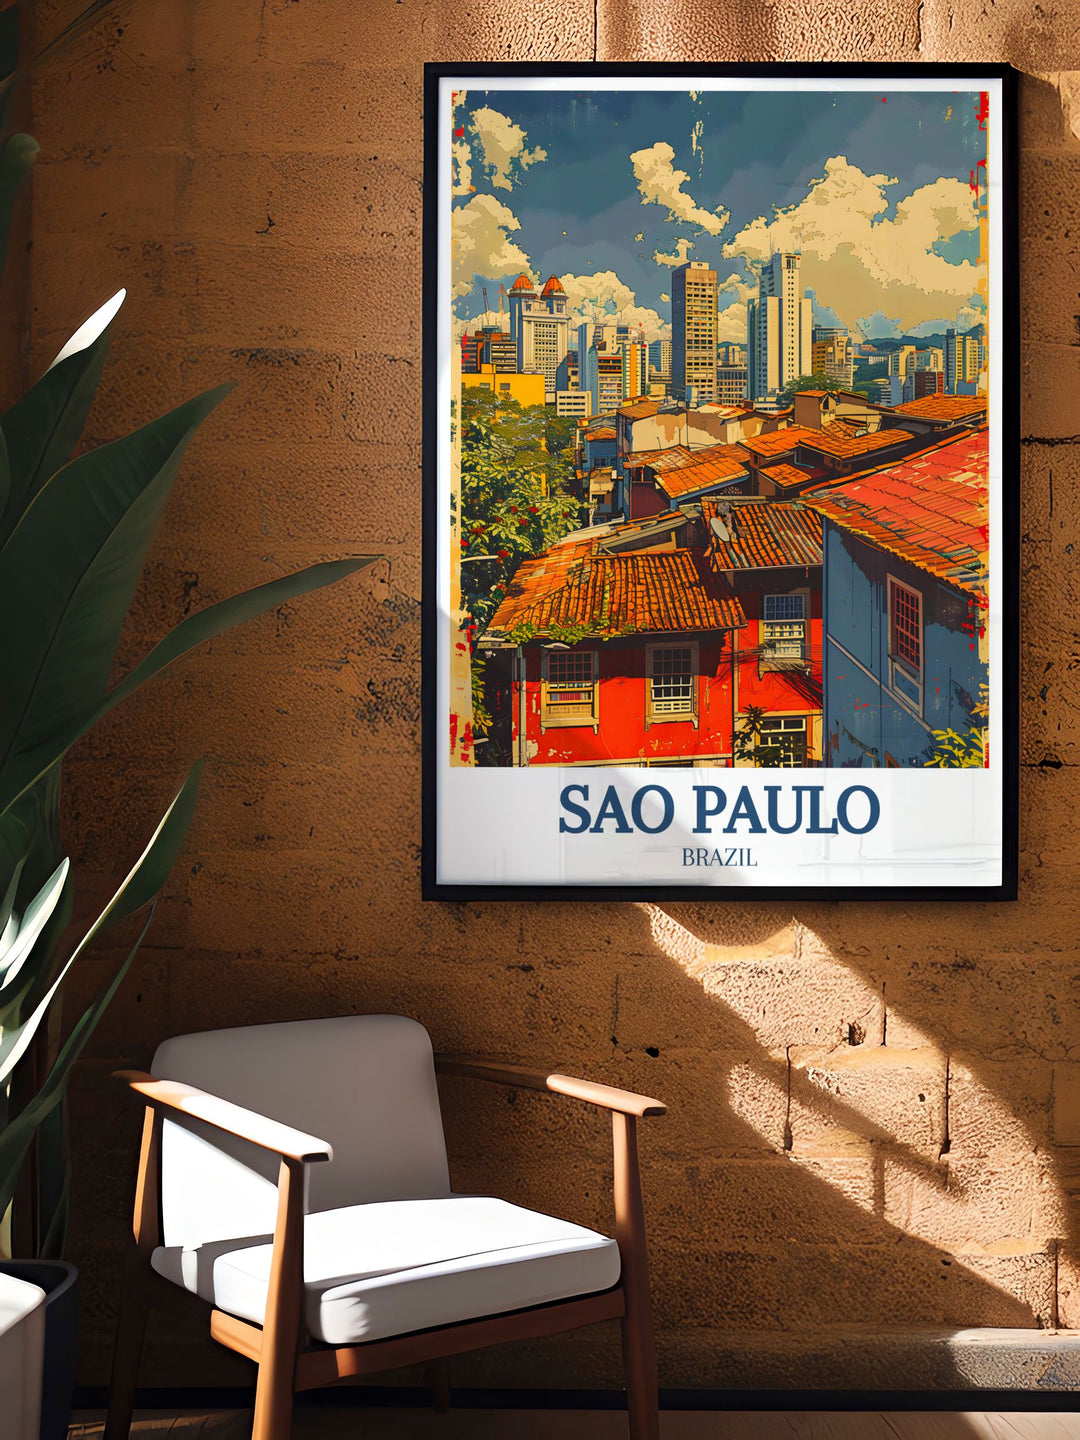 Elegant print of the Altino Arantes building in Sao Paulo, showcasing its impressive Art Deco design and historical importance, adding a touch of sophistication to any space.